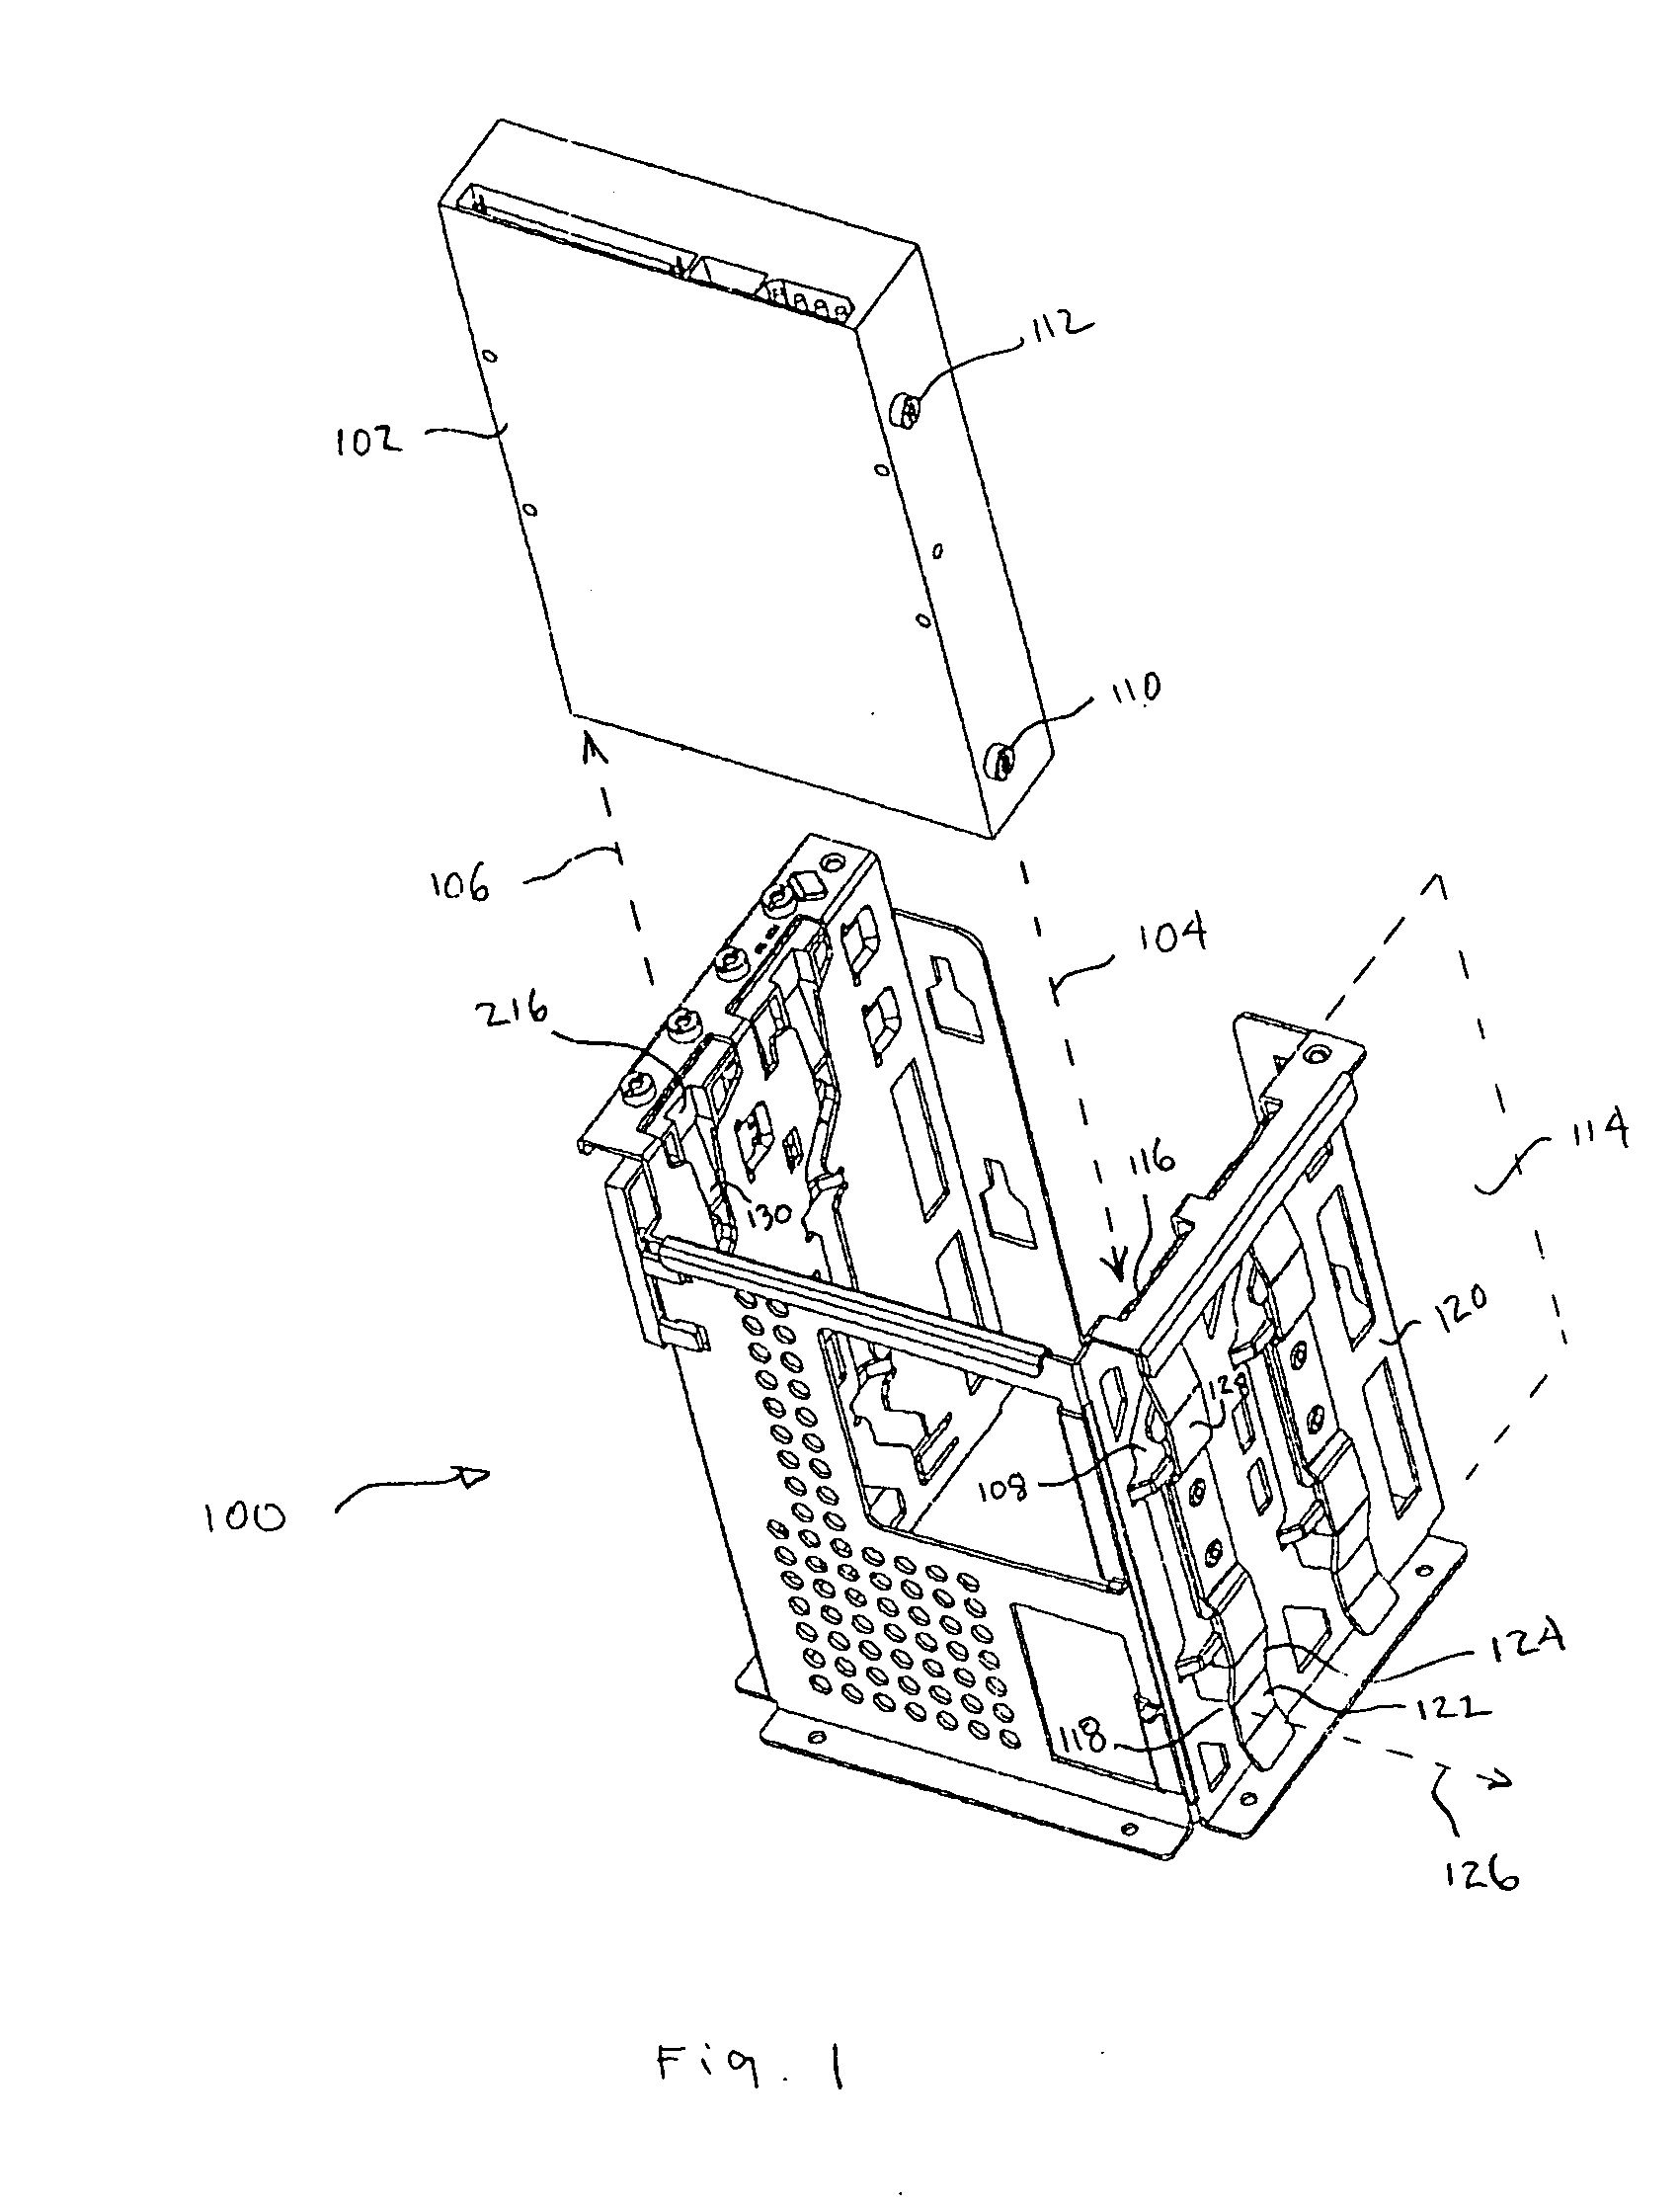 Media drive cage having improved insertion shock and air flow properties